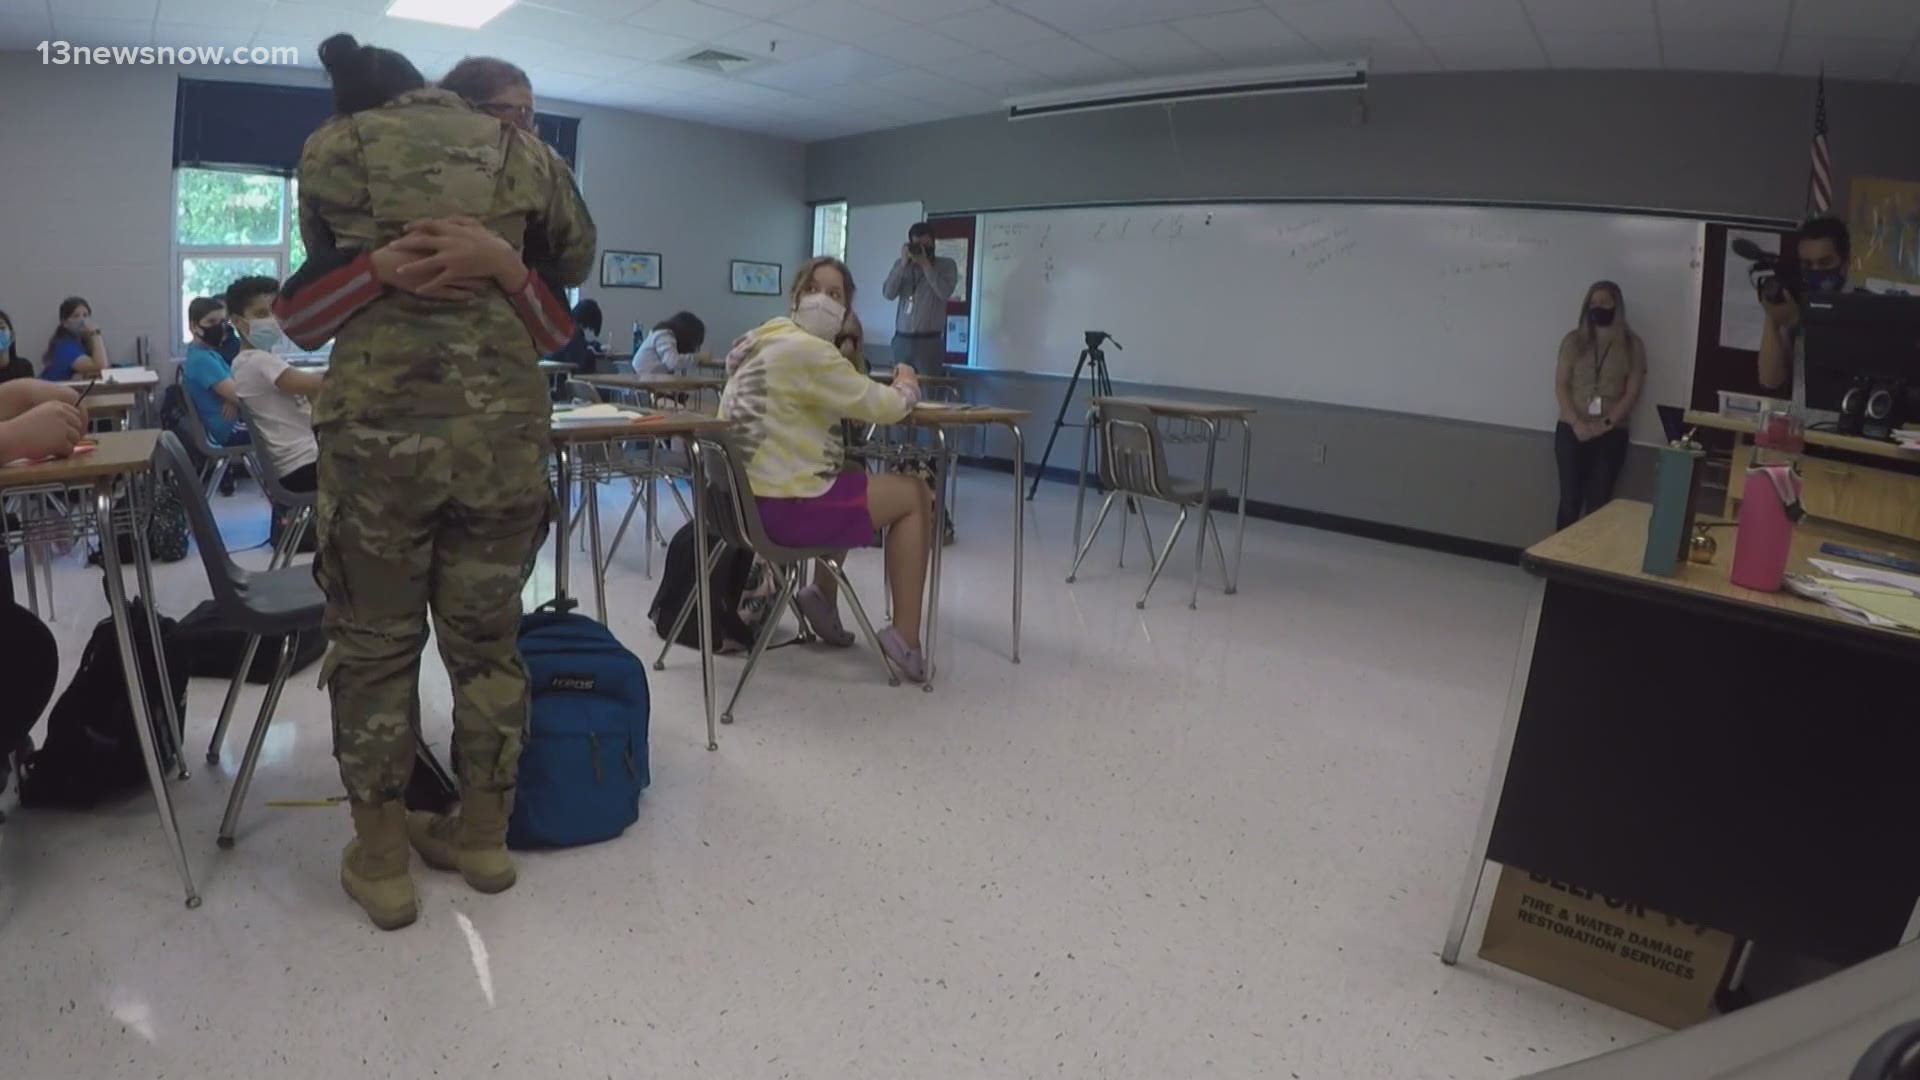 Distance, is often the hardest part of military deployments. But it also makes returning home even sweeter.